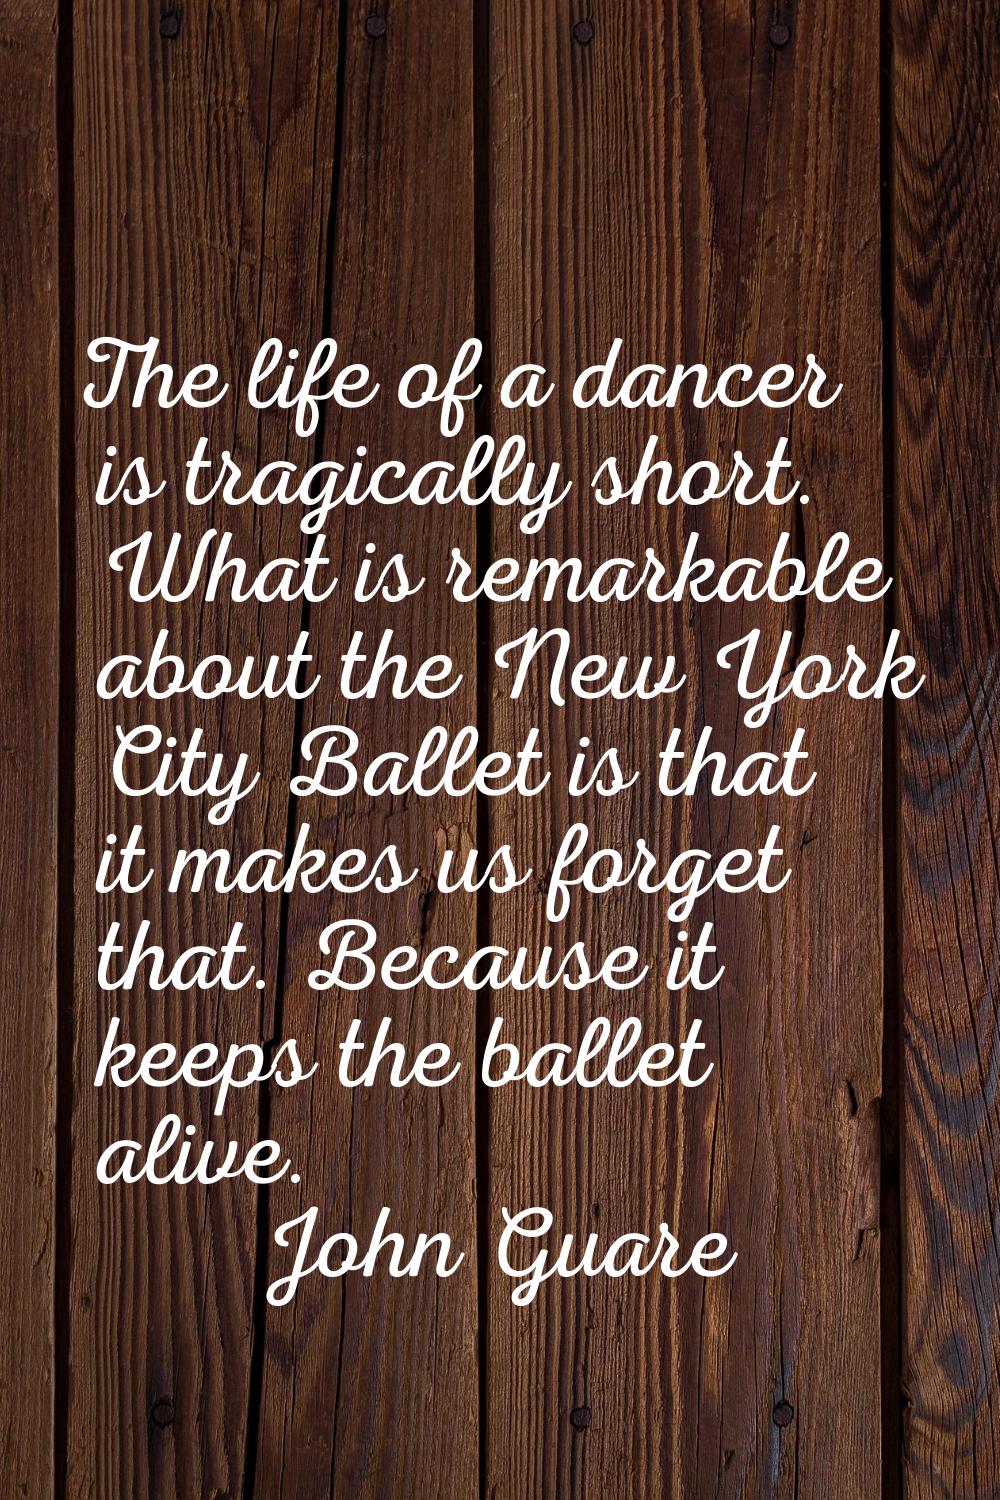 The life of a dancer is tragically short. What is remarkable about the New York City Ballet is that